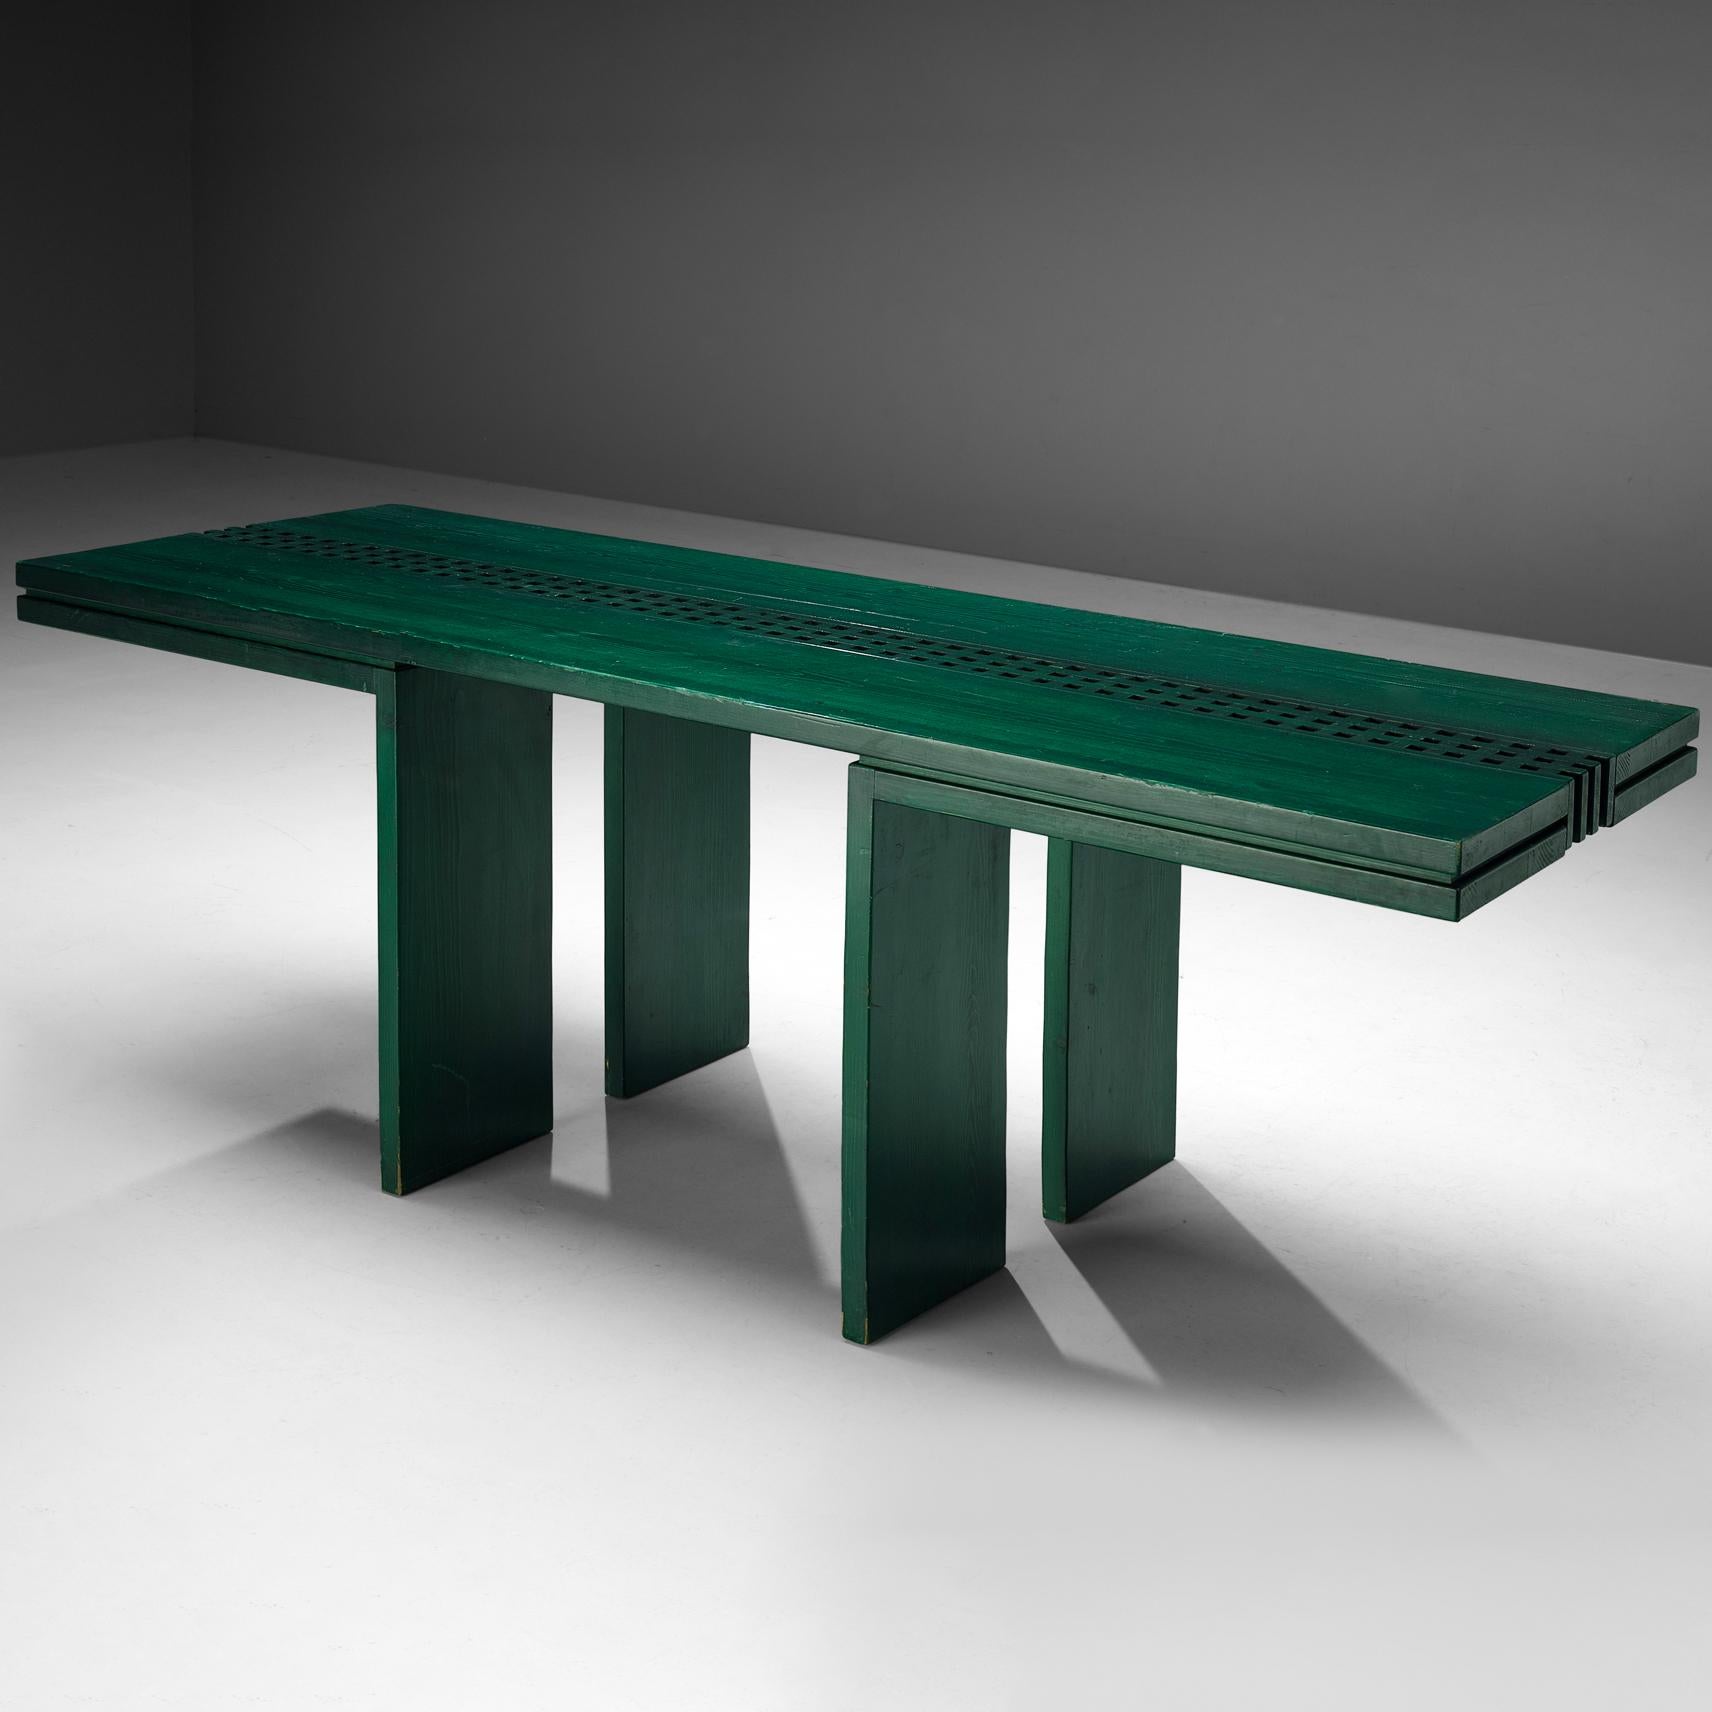 Dining table, lacquered pine, Italy, 1970s

Eccentric dining table executed in vibrant green stained pine. The shimmering glossy finish reveals the subtle grain pattern of the pine wood beautifully. Contrary to the closed frame, an open grid of